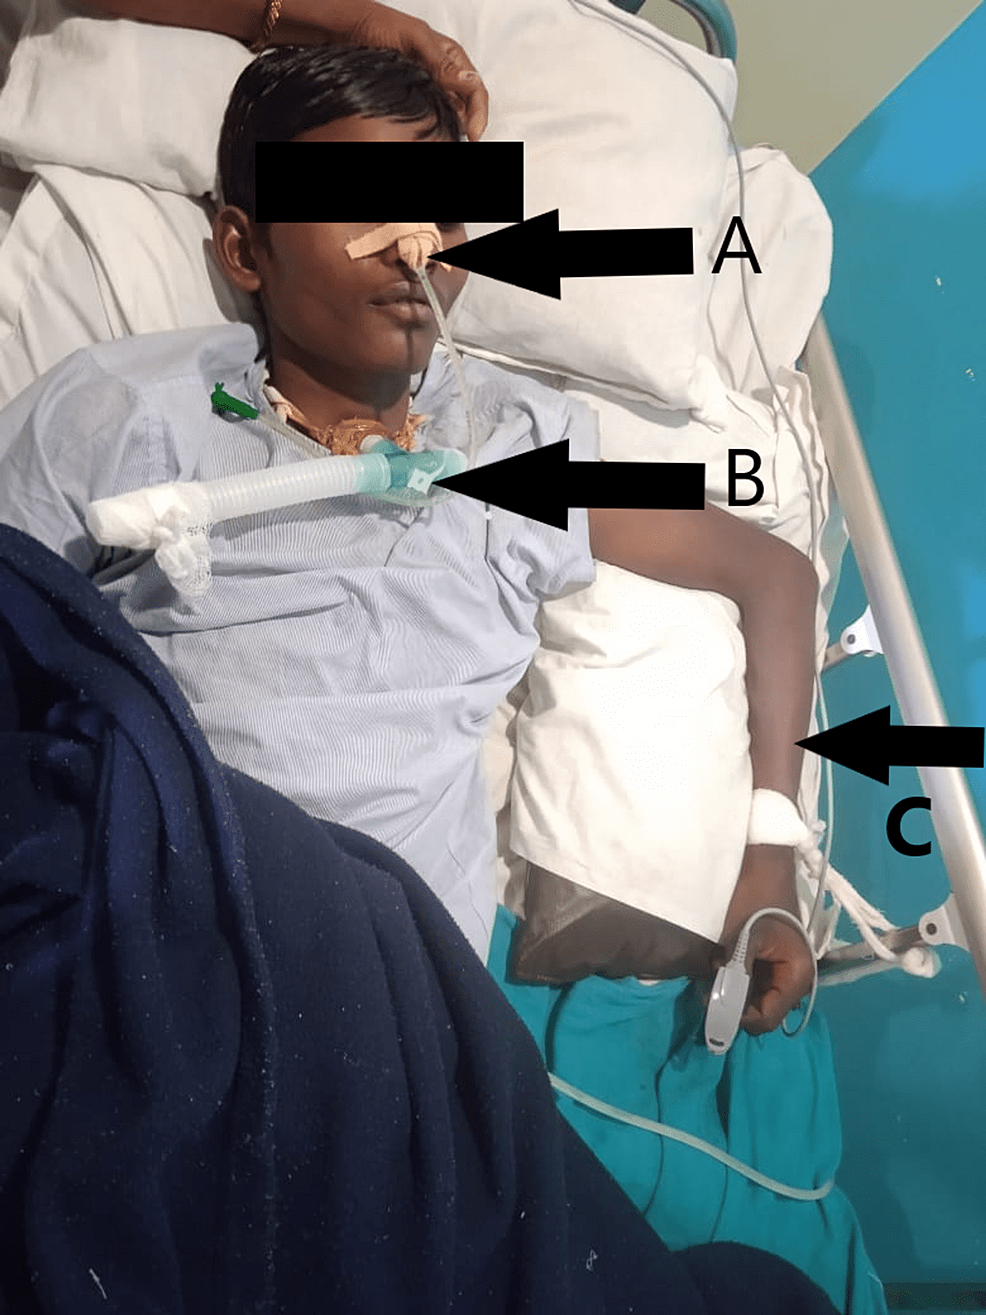 A:-Ryle’s-tube-(in-situ);-B:-tracheostomy-tube-(in-situ);-C:-left-elbow-and-wrist-held-in-flexion-with-10-degrees-of-elbow-and-wrist-contracture-and-supported-with-pillow.